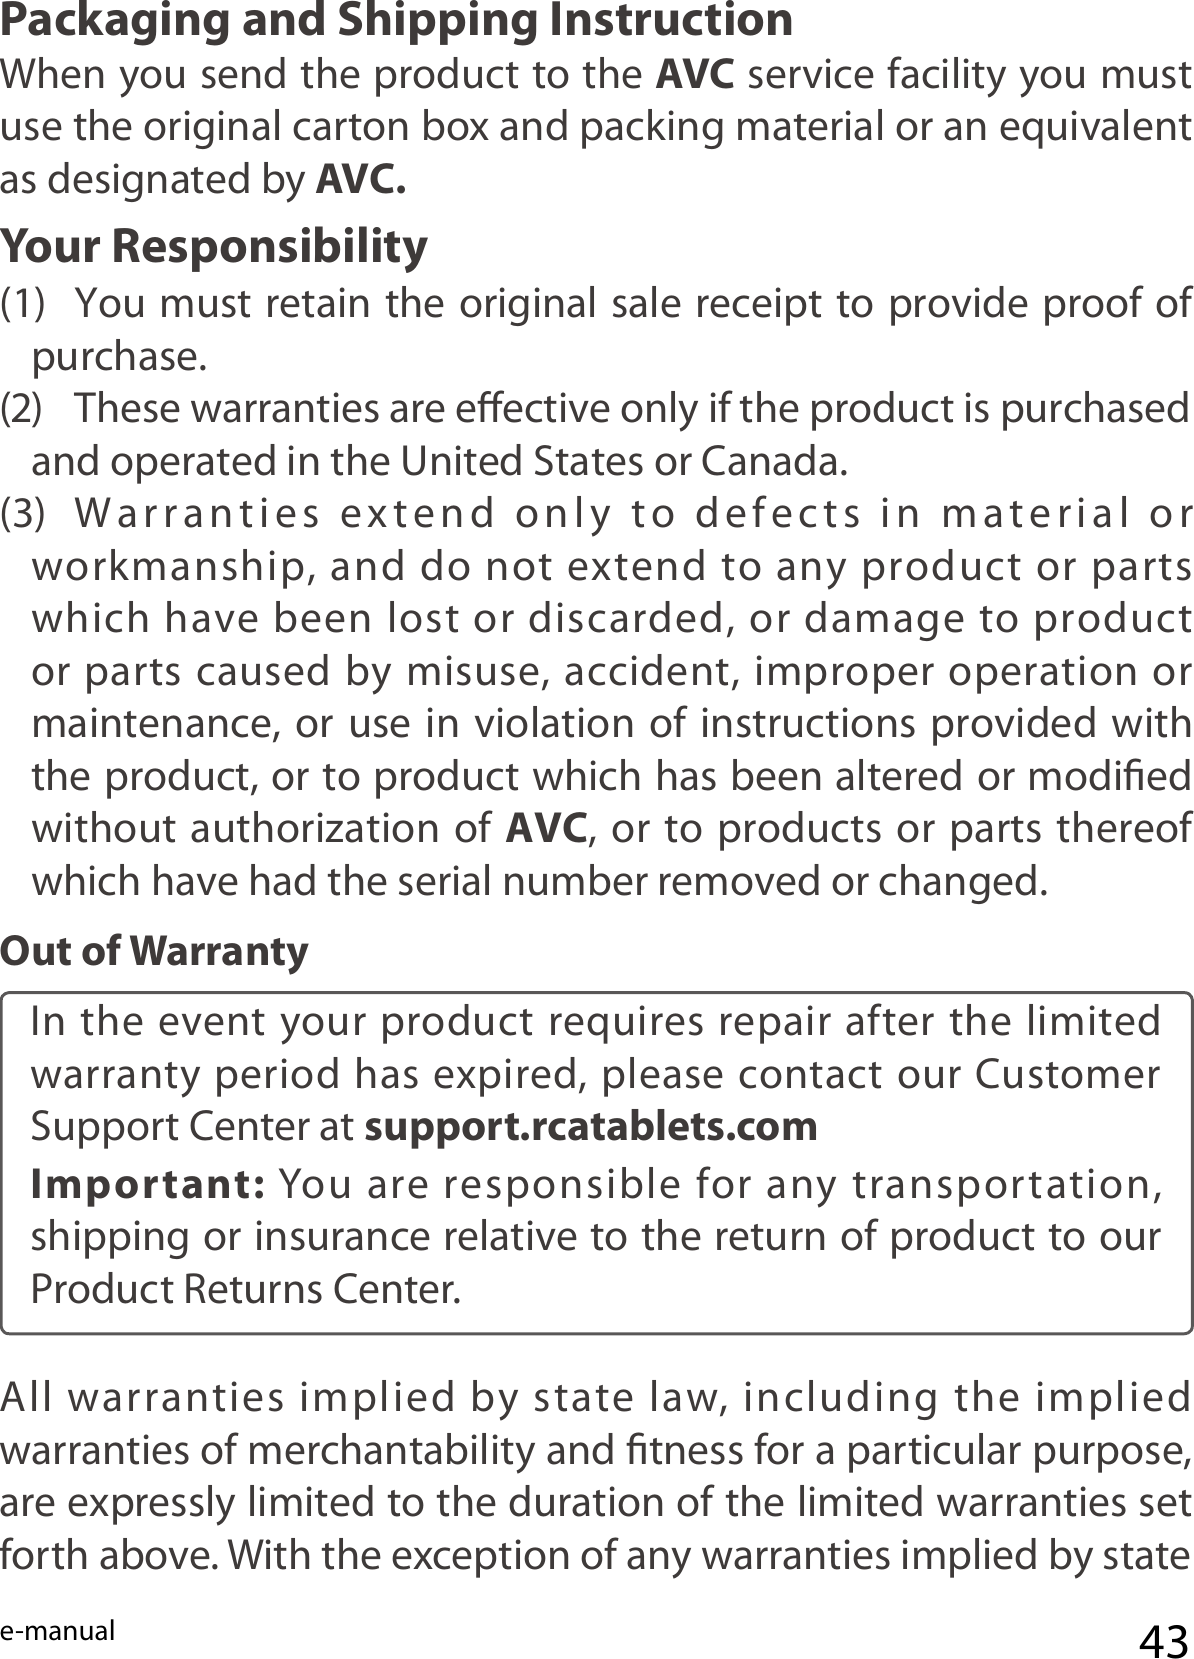 e-manual 43Packaging and Shipping InstructionWhen you send the product to the AVC service facility you must use the original carton box and packing material or an equivalent as designated by AVC.Your Responsibility(1)  You must retain the original sale receipt to provide proof of purchase.(2)  These warranties are eective only if the product is purchased and operated in the United States or Canada.(3)  Warranties  extend  only  to  defects  in  material  or  workmanship, and do not extend to any product or parts which have been lost or discarded, or damage to product or parts caused by misuse, accident, improper operation or maintenance, or use in violation of instructions provided with the product, or to product which has been altered or modied without authorization of AVC, or to products or parts thereof which have had the serial number removed or changed.Out of WarrantyIn the event your product requires repair after the limited warranty period has expired, please contact our Customer Support Center at support.rcatablets.com Important:  You  are responsible for any transportation, shipping or insurance relative to the return of product to our Product Returns Center.All  warranties  implied  by  state  law,  including  the  implied warranties of merchantability and tness for a particular purpose, are expressly limited to the duration of the limited warranties set forth above. With the exception of any warranties implied by state 